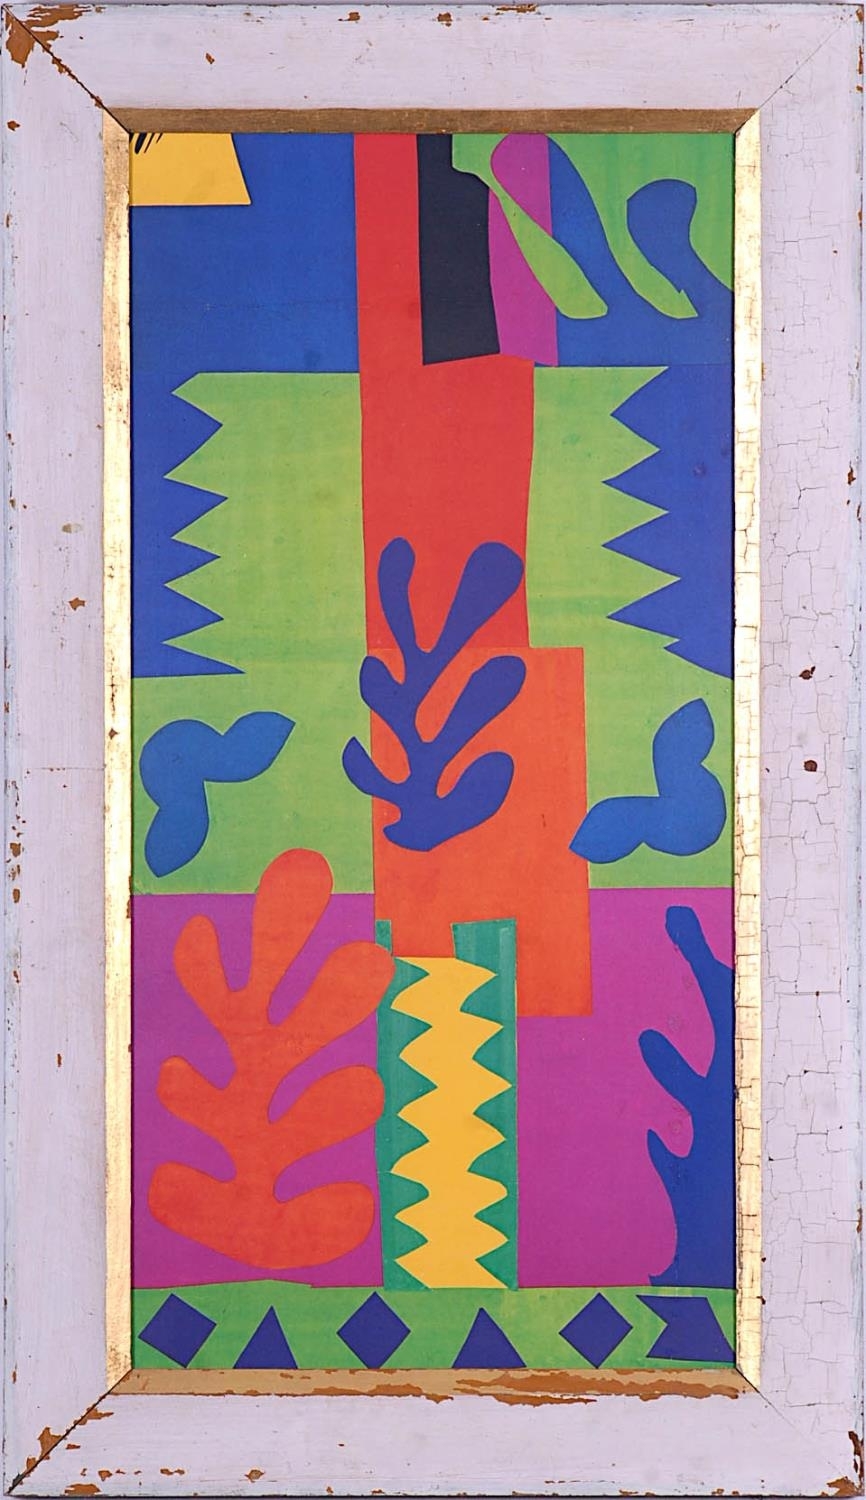 Artwork by Henri Matisse, The cut outs, Made of lithographic poster